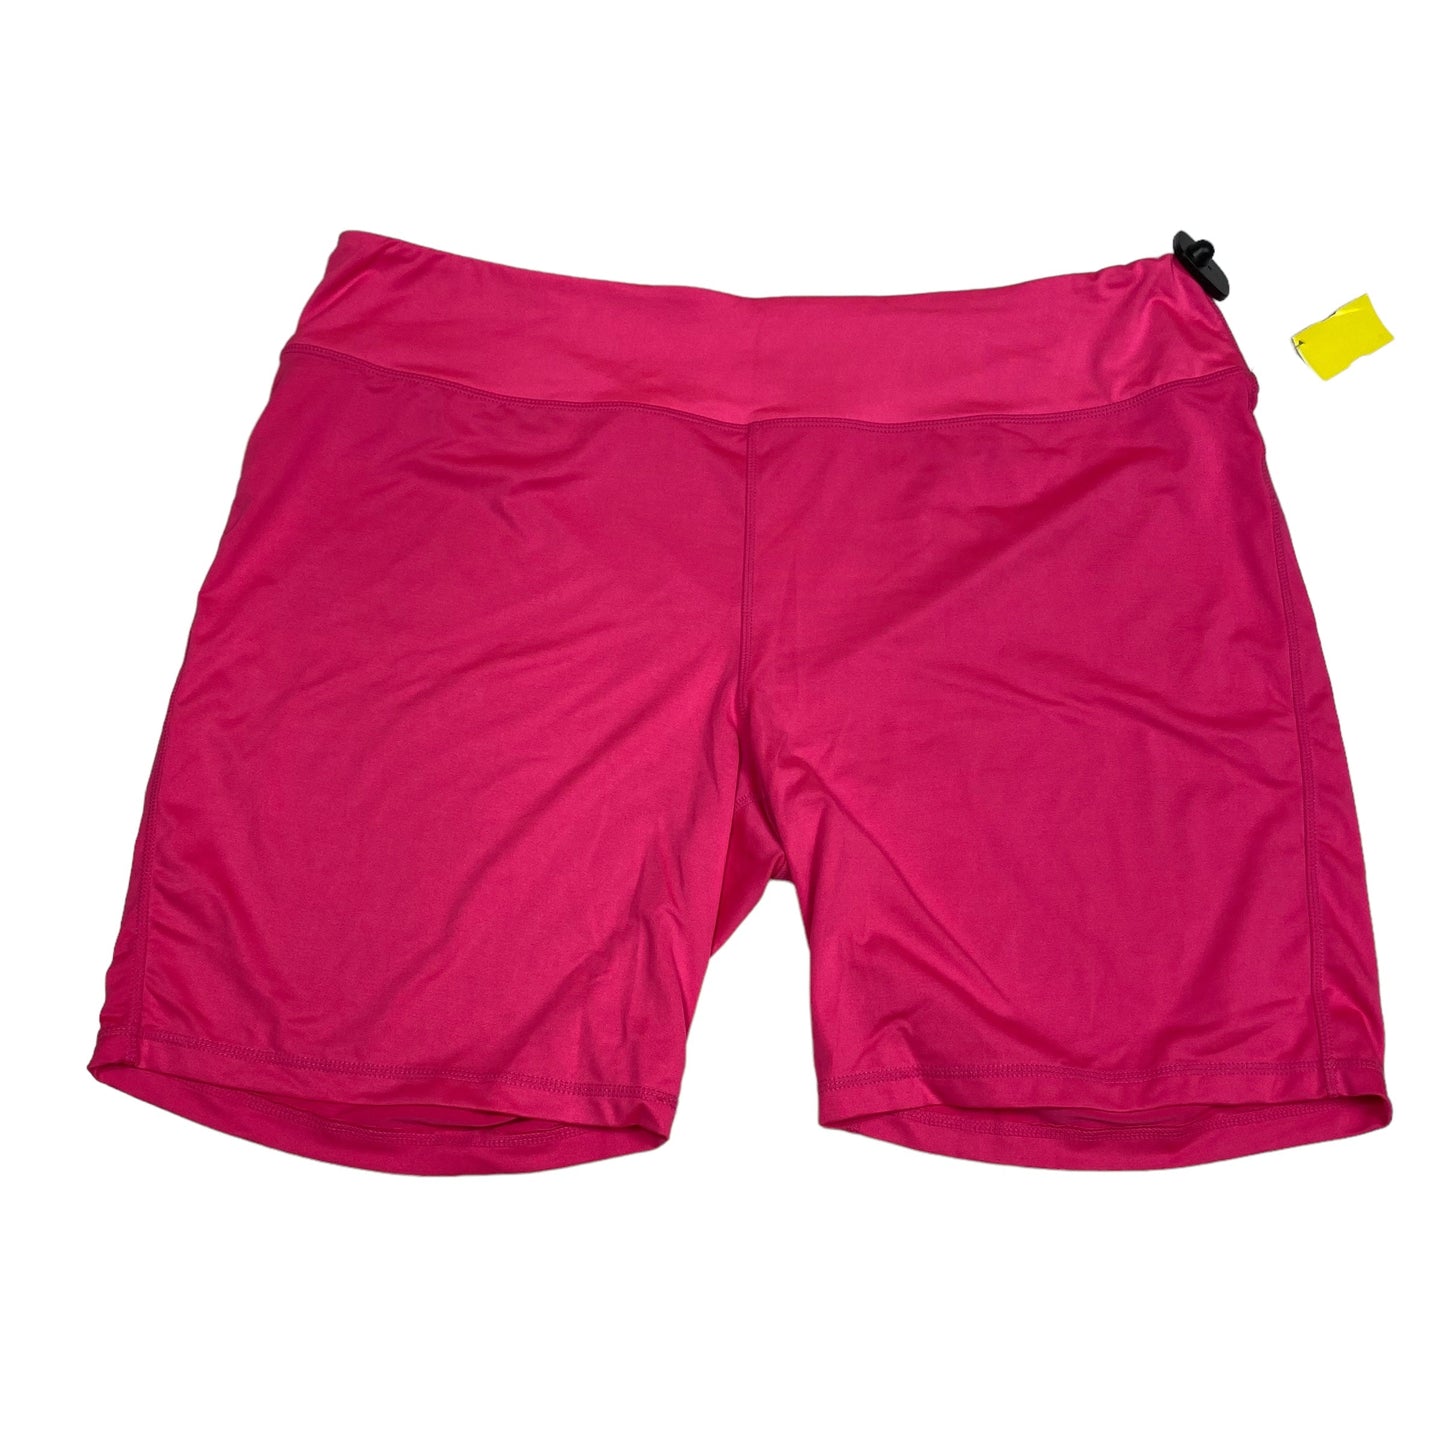 Pink Athletic Shorts Crown And Ivy, Size 4x